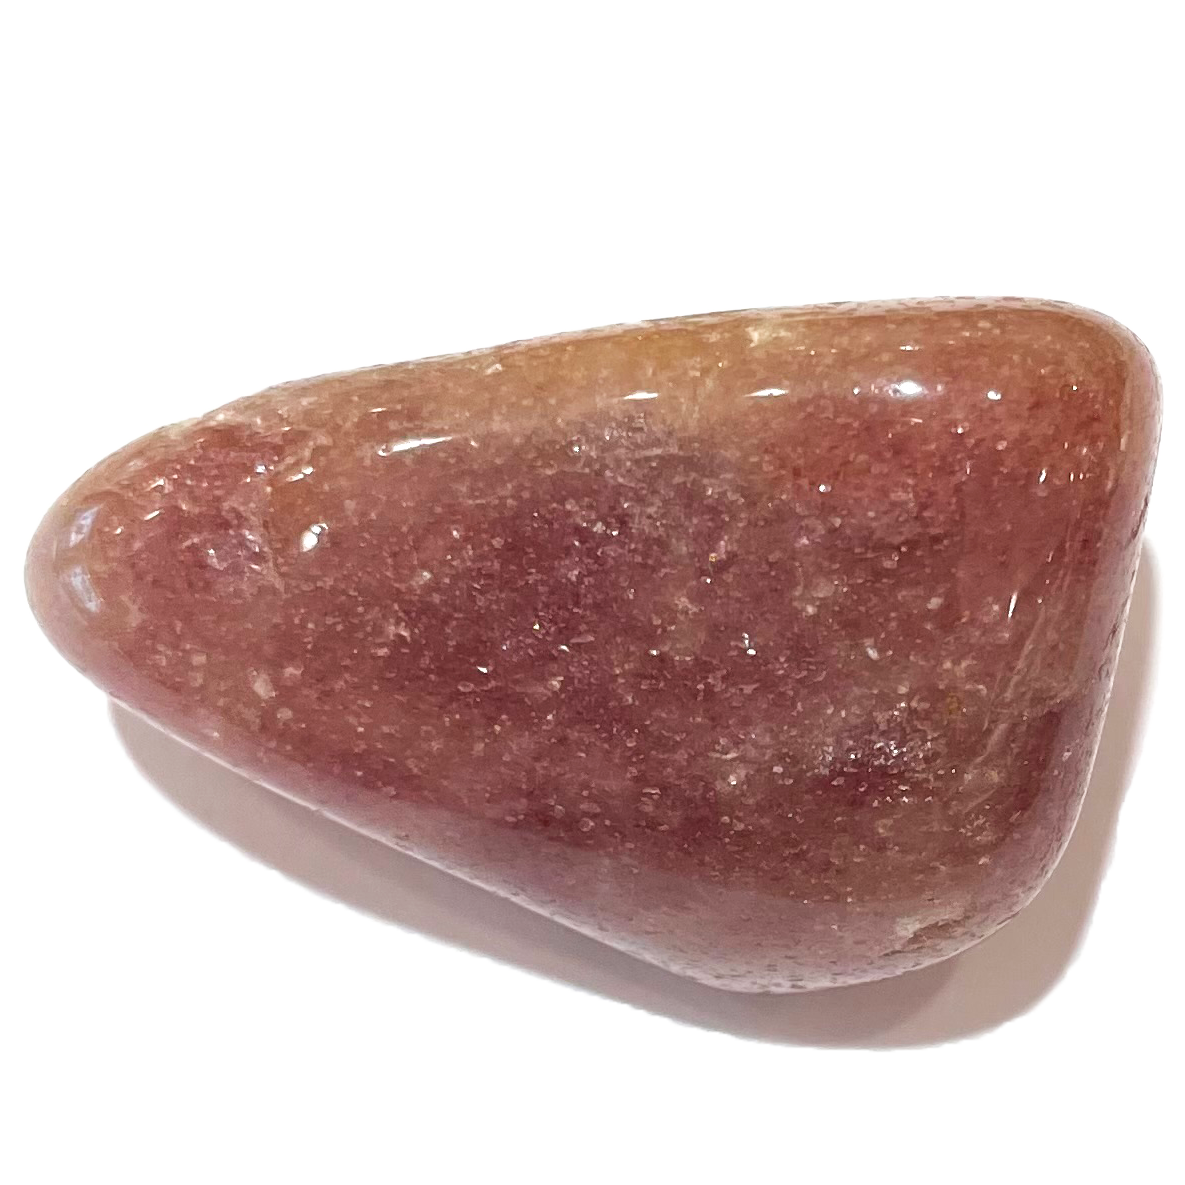 A tumble polished piece of pink aventurine stone.  The material is dark pink with reflective mica inclusions.